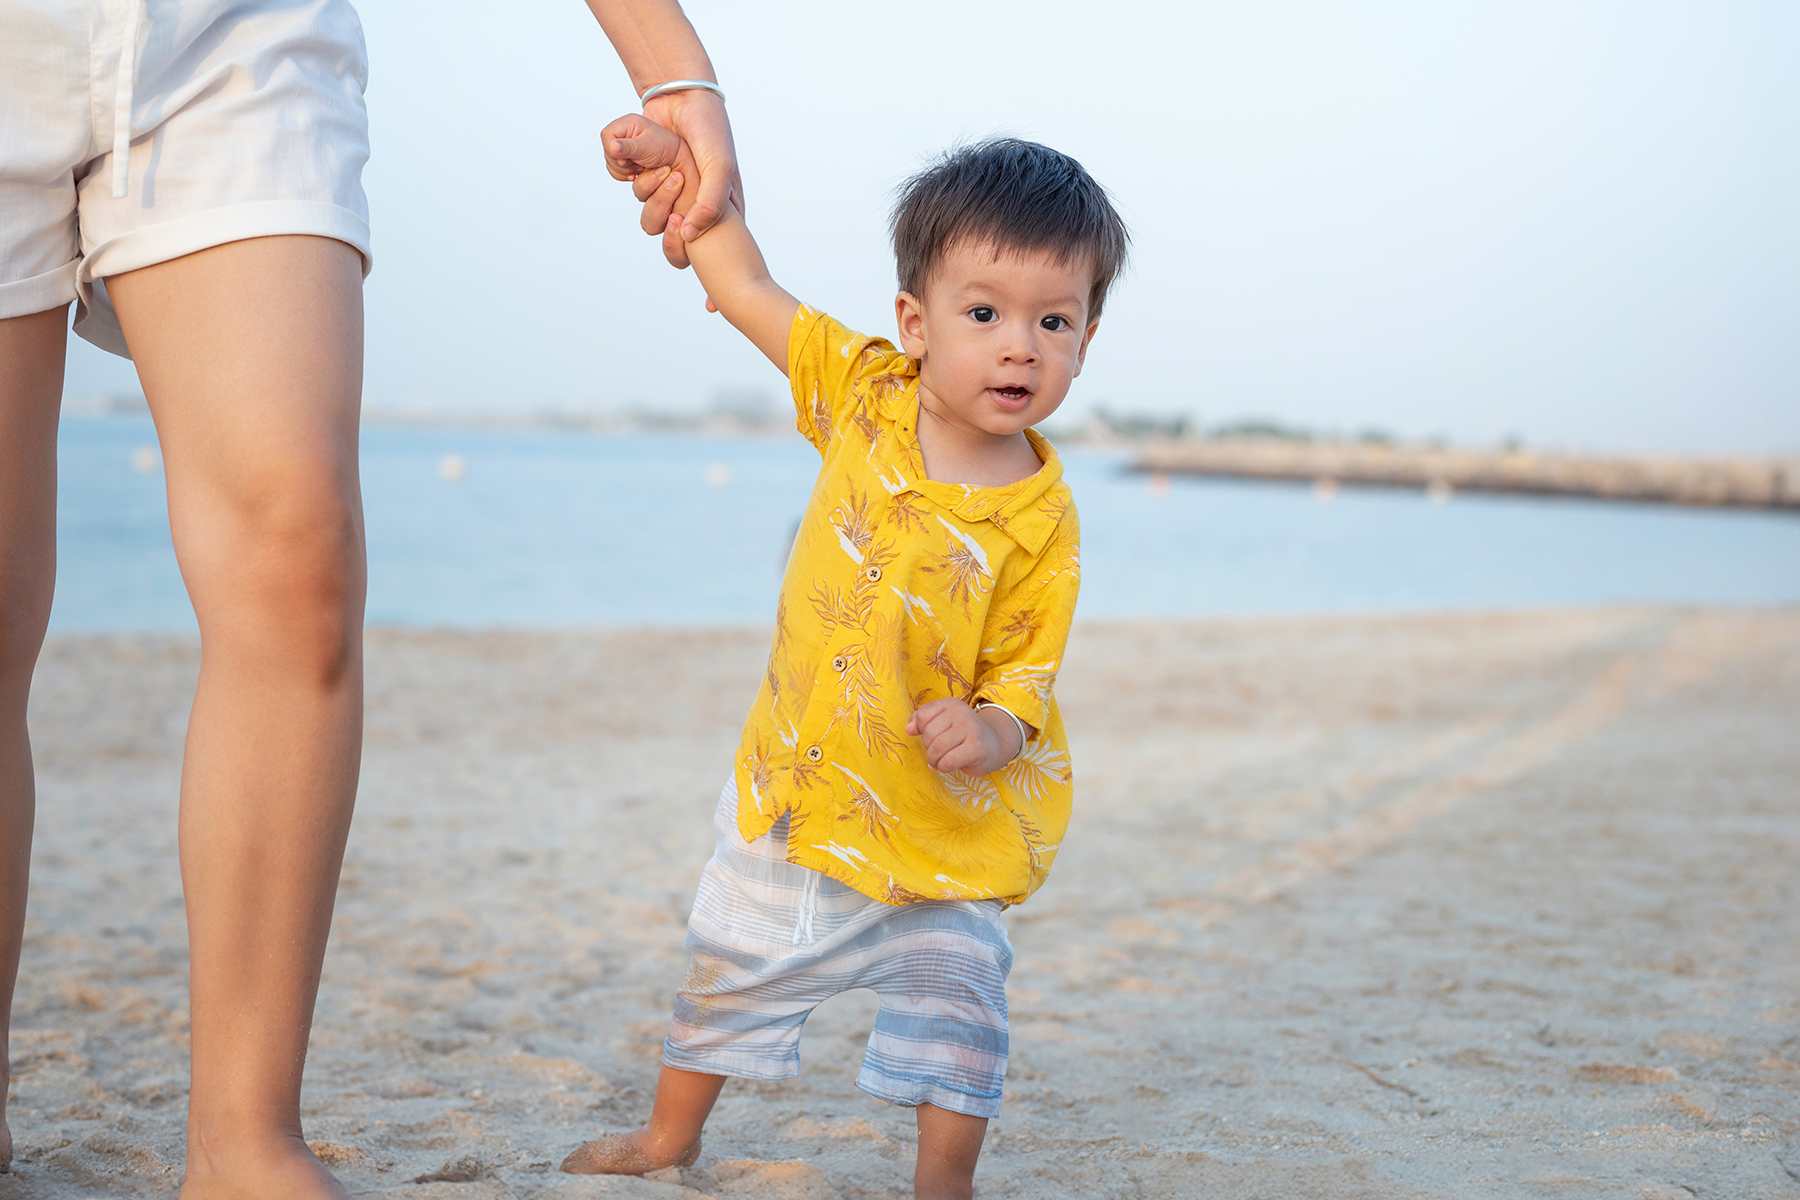 Child walking on the beach holding hands with their parent.